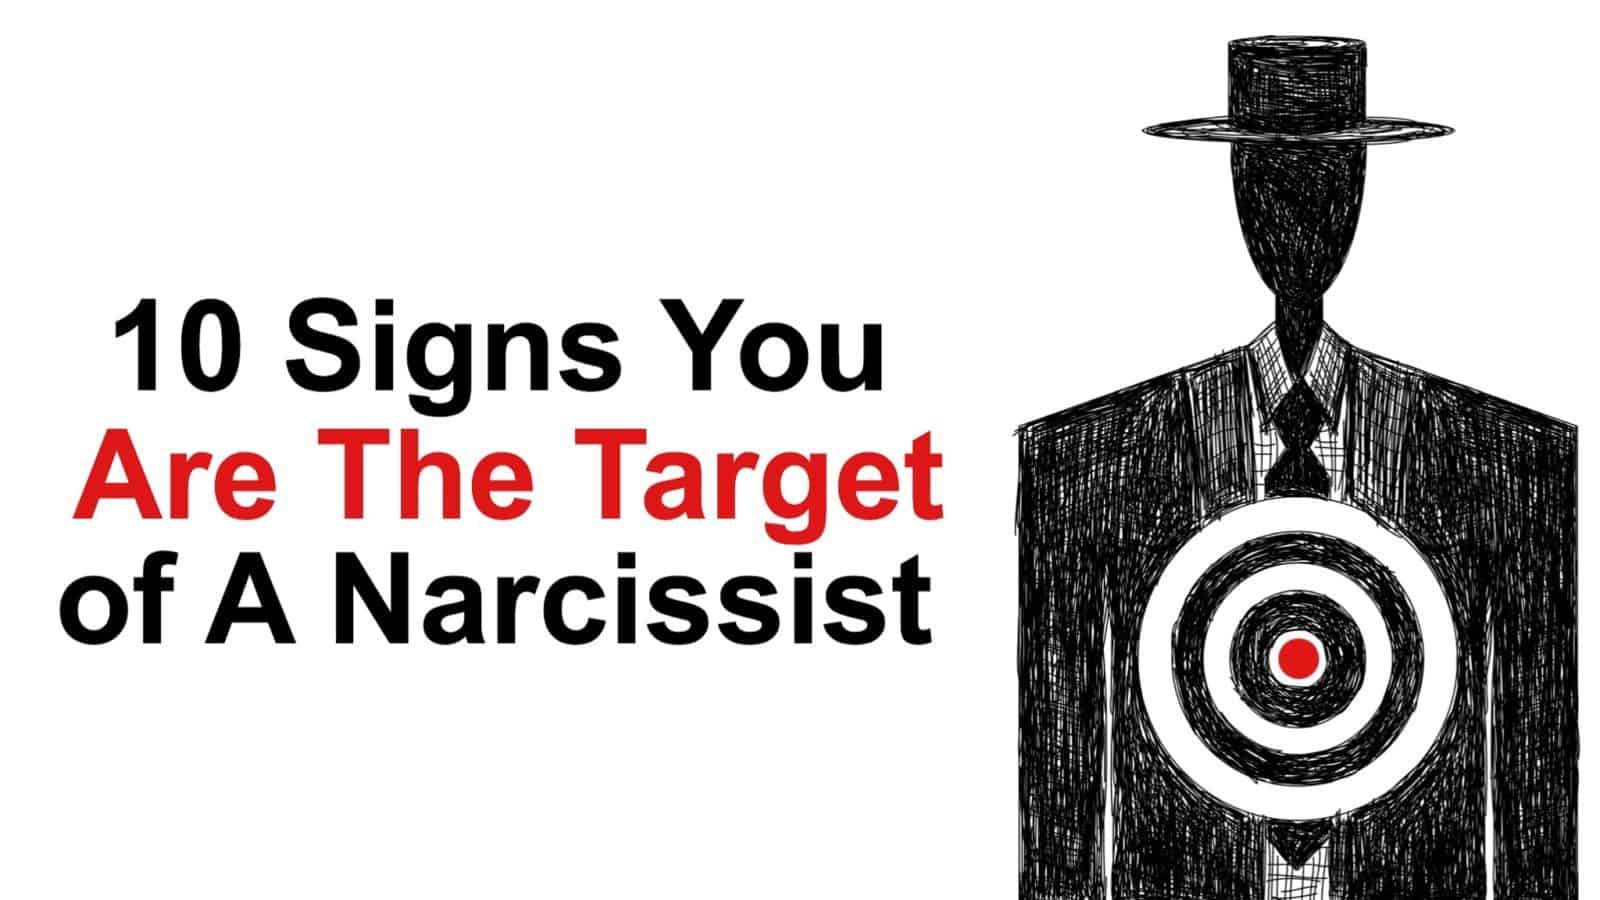 Narcissist a you signs are 10 Signs